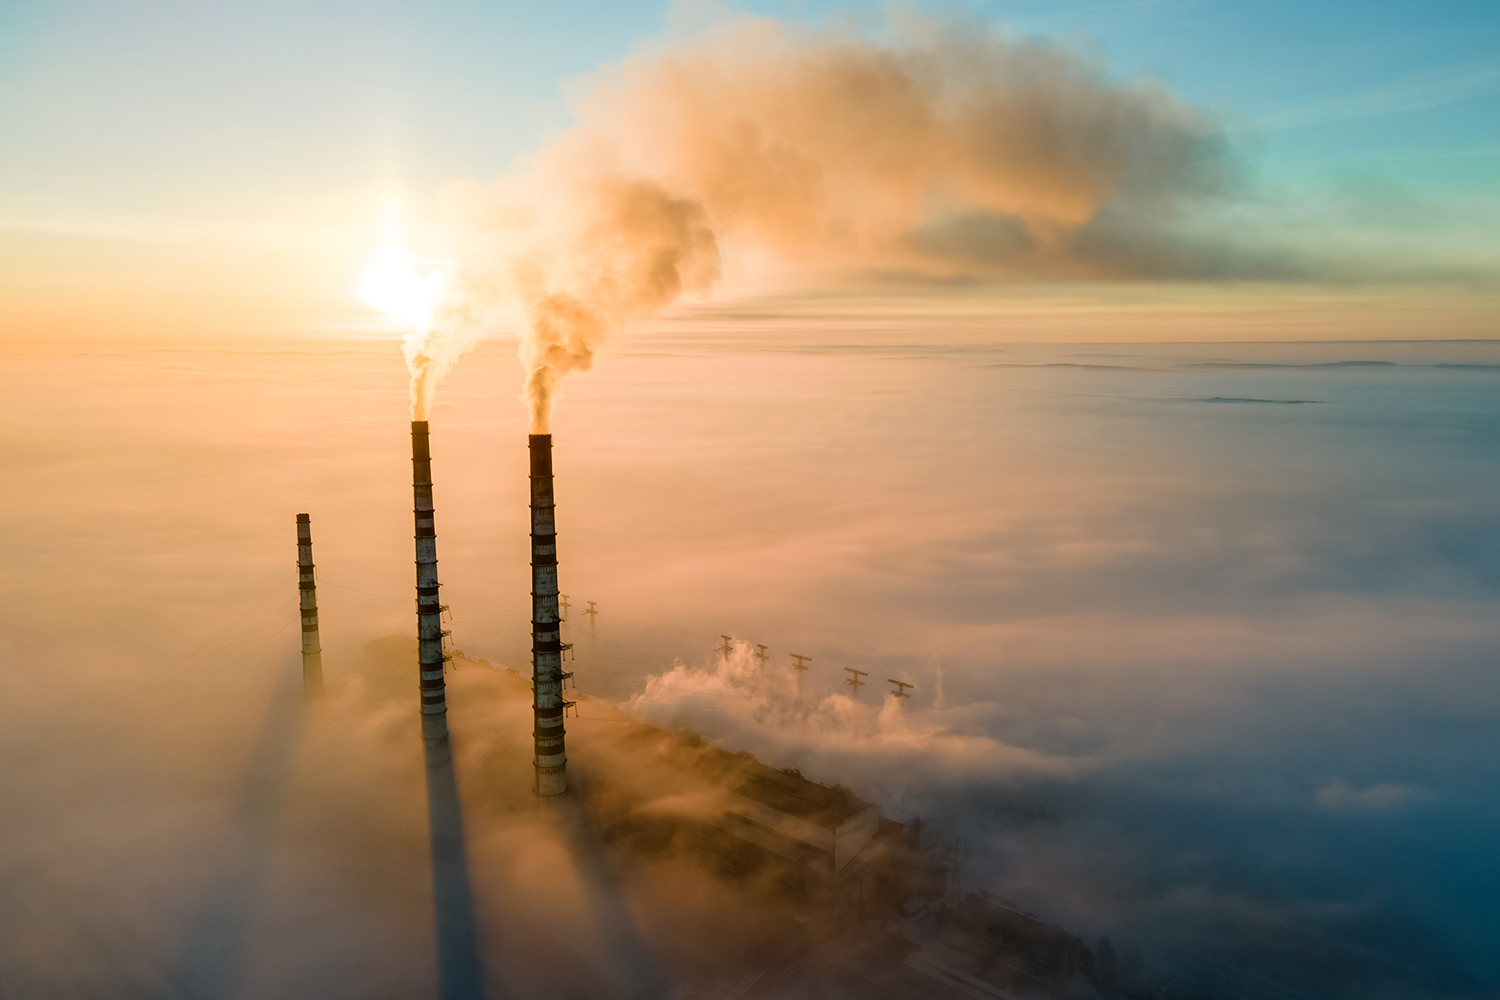 Coal power plant chimneys tower above low clouds, pumping steam into the  blue sky at sunrise.